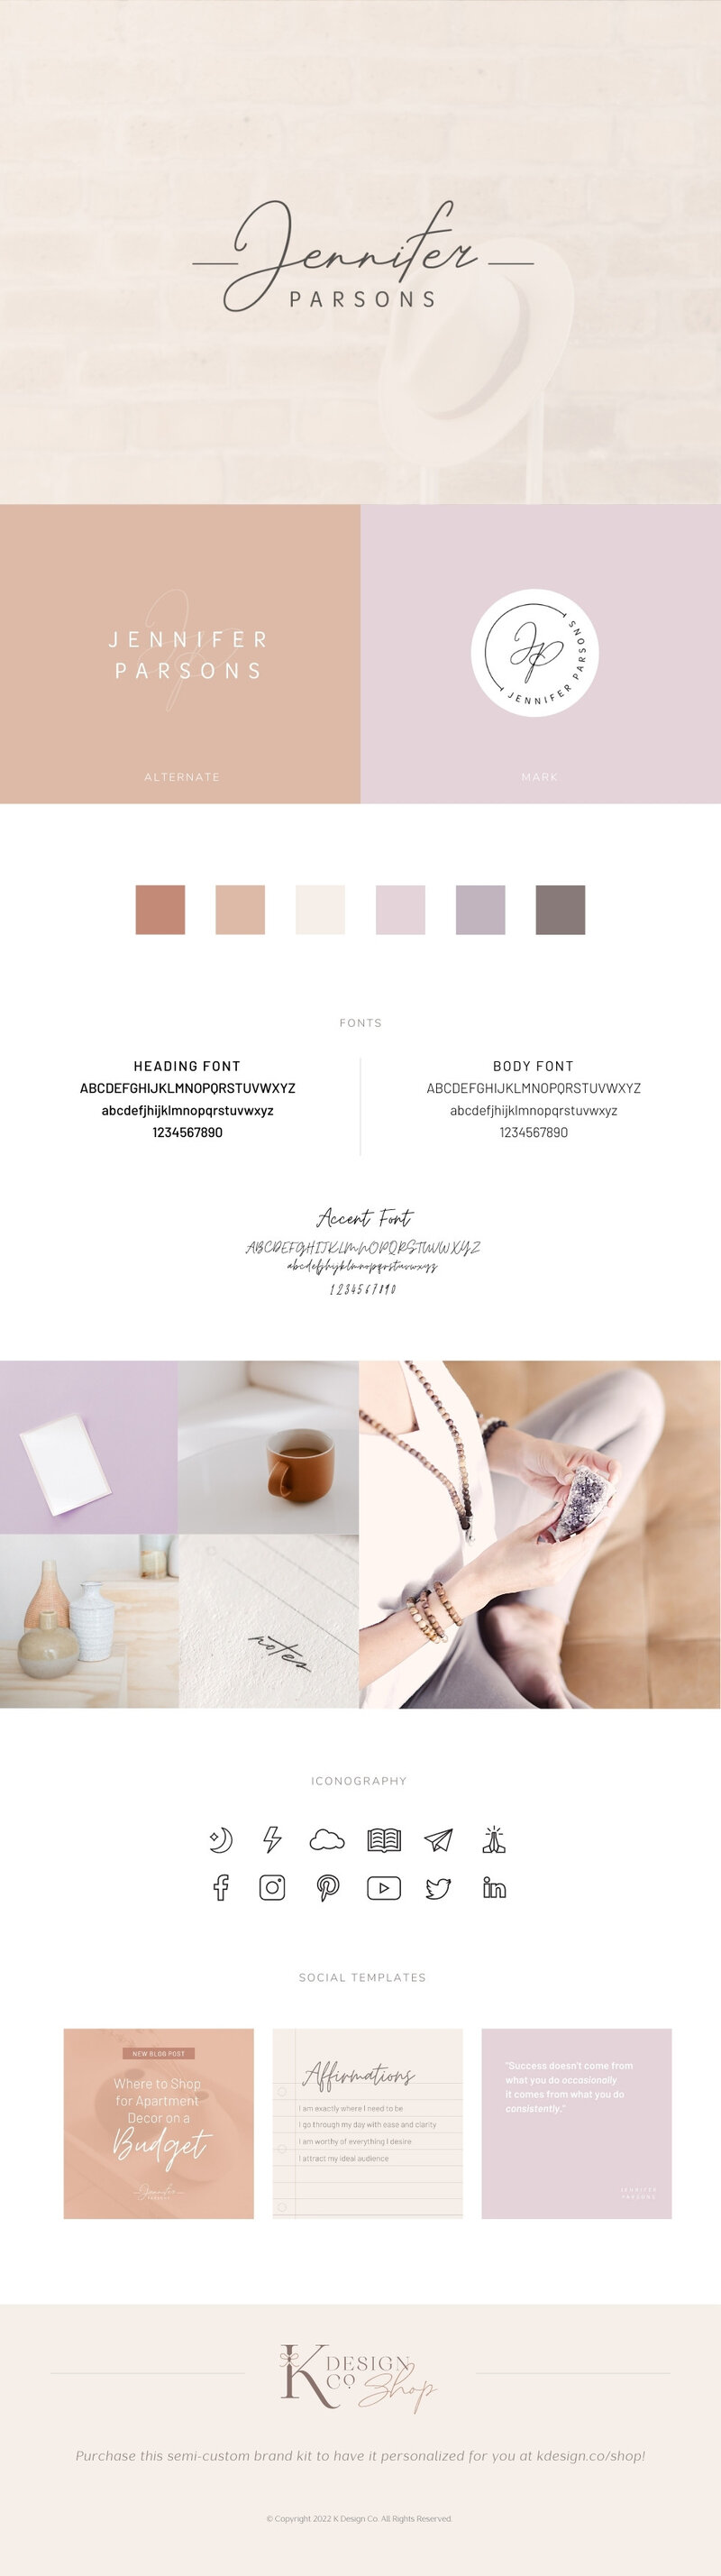 Signature logo / cursive logo and brand kit with moodboard, social media templates, icons, color palette, font suggestions and inspirational images